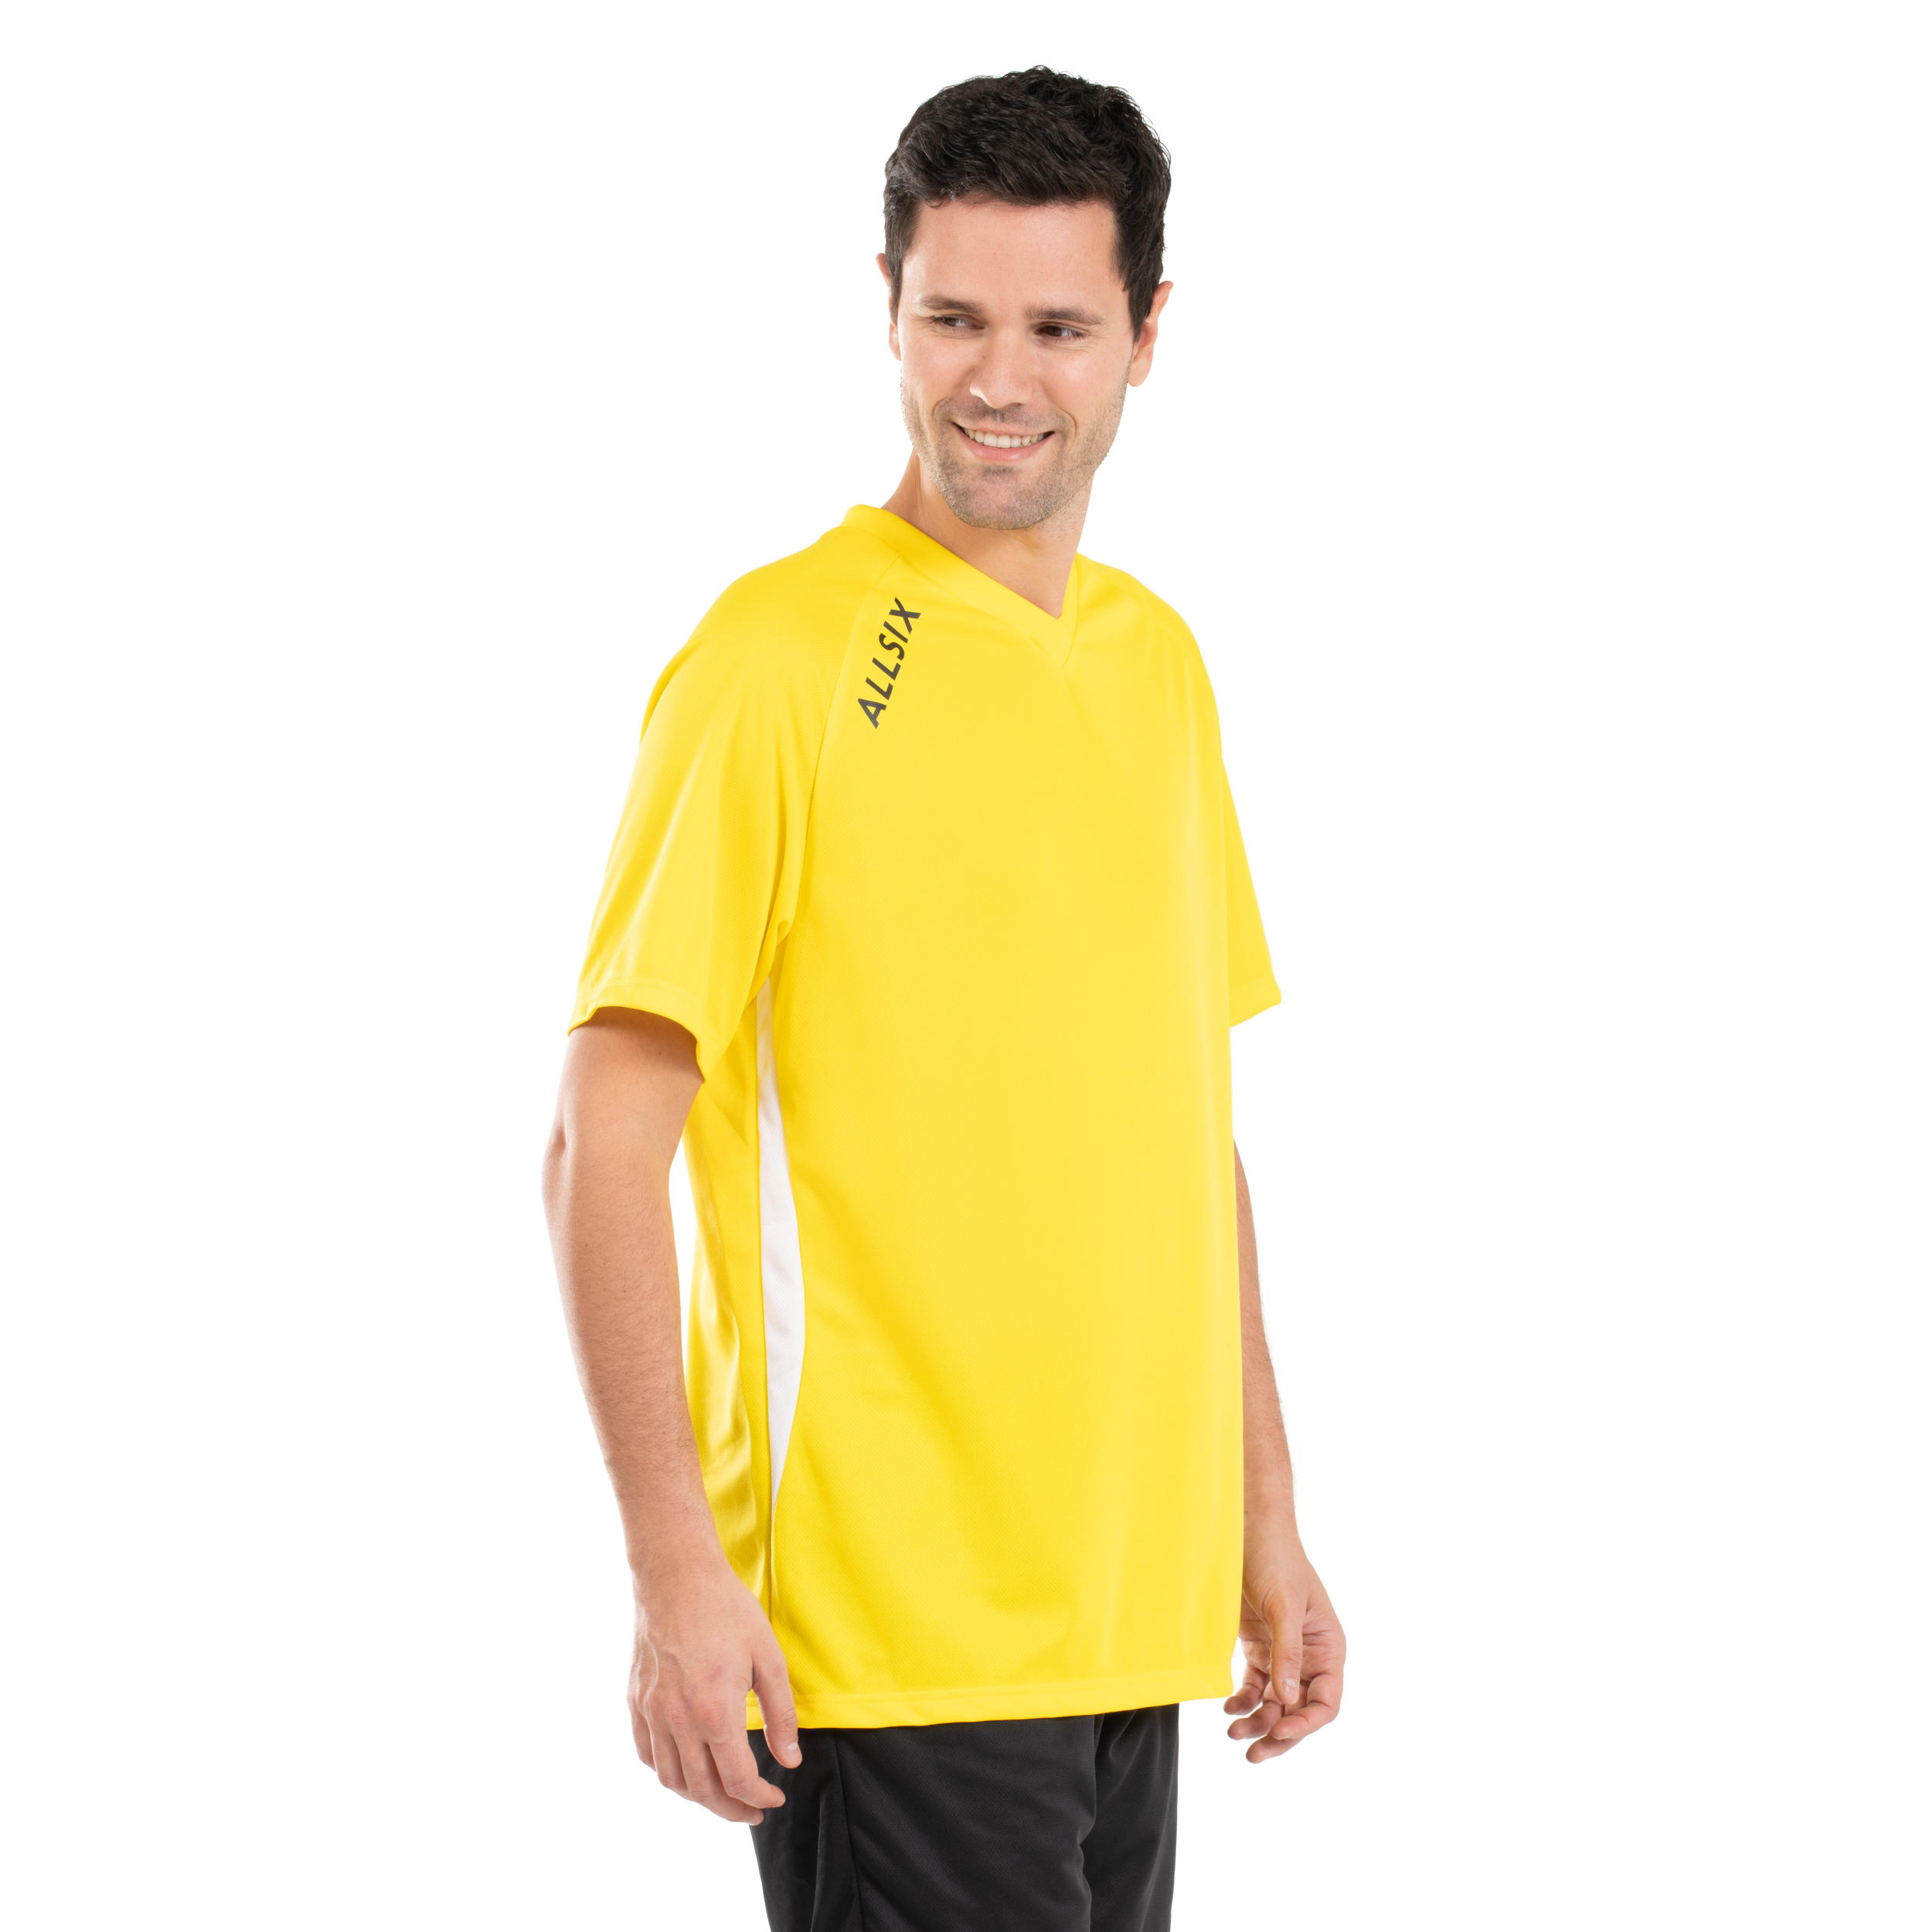 V100 Volleyball Jersey - Yellow 5/8